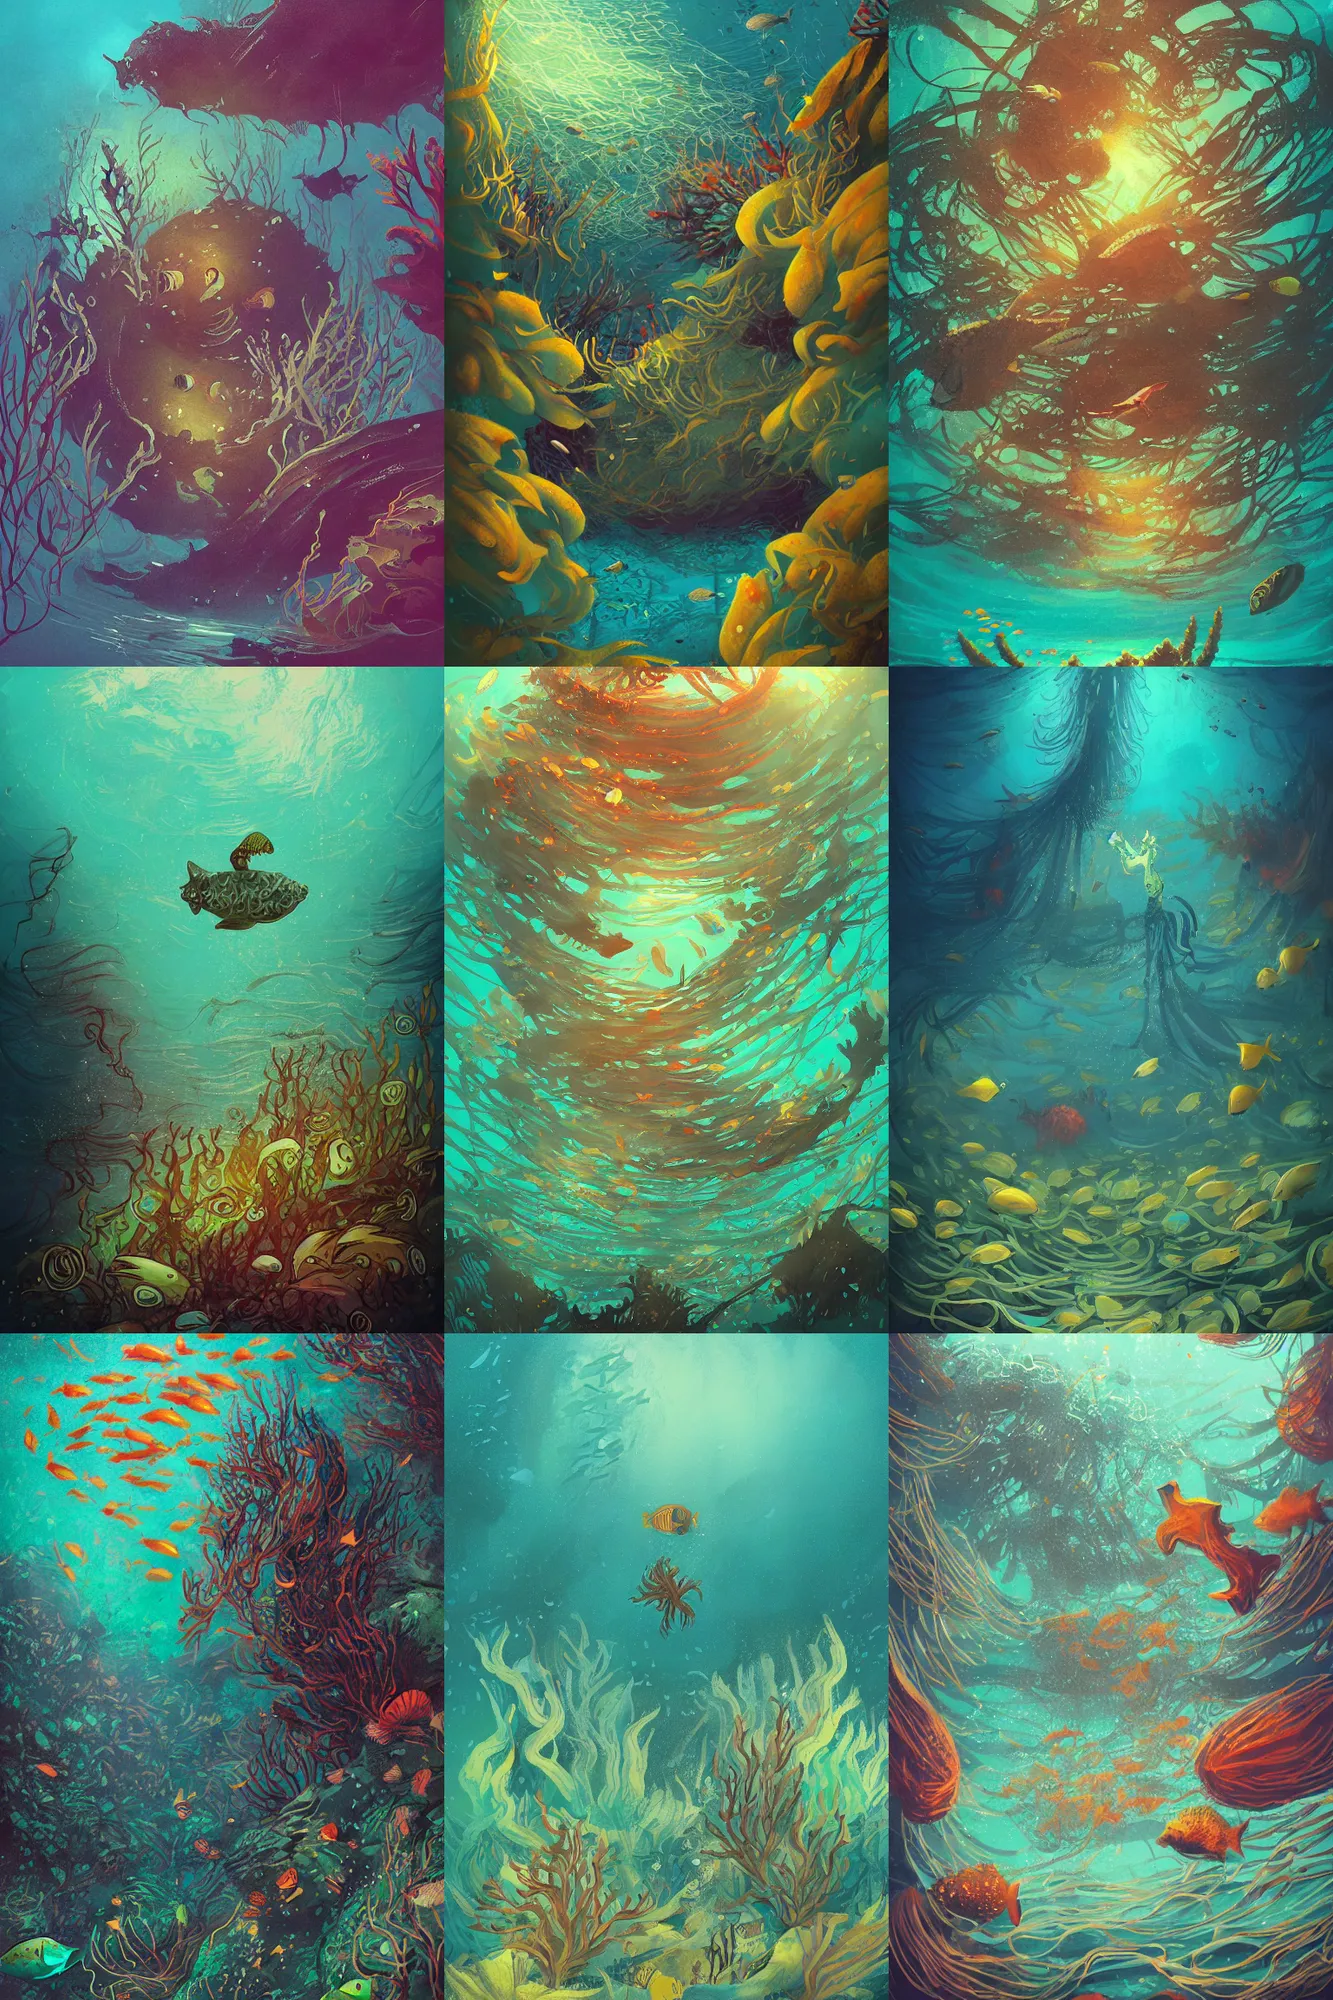 Prompt: illustration under the sea, surrounded by thick kelp, many small tropical fish, art by Anato Finnstark